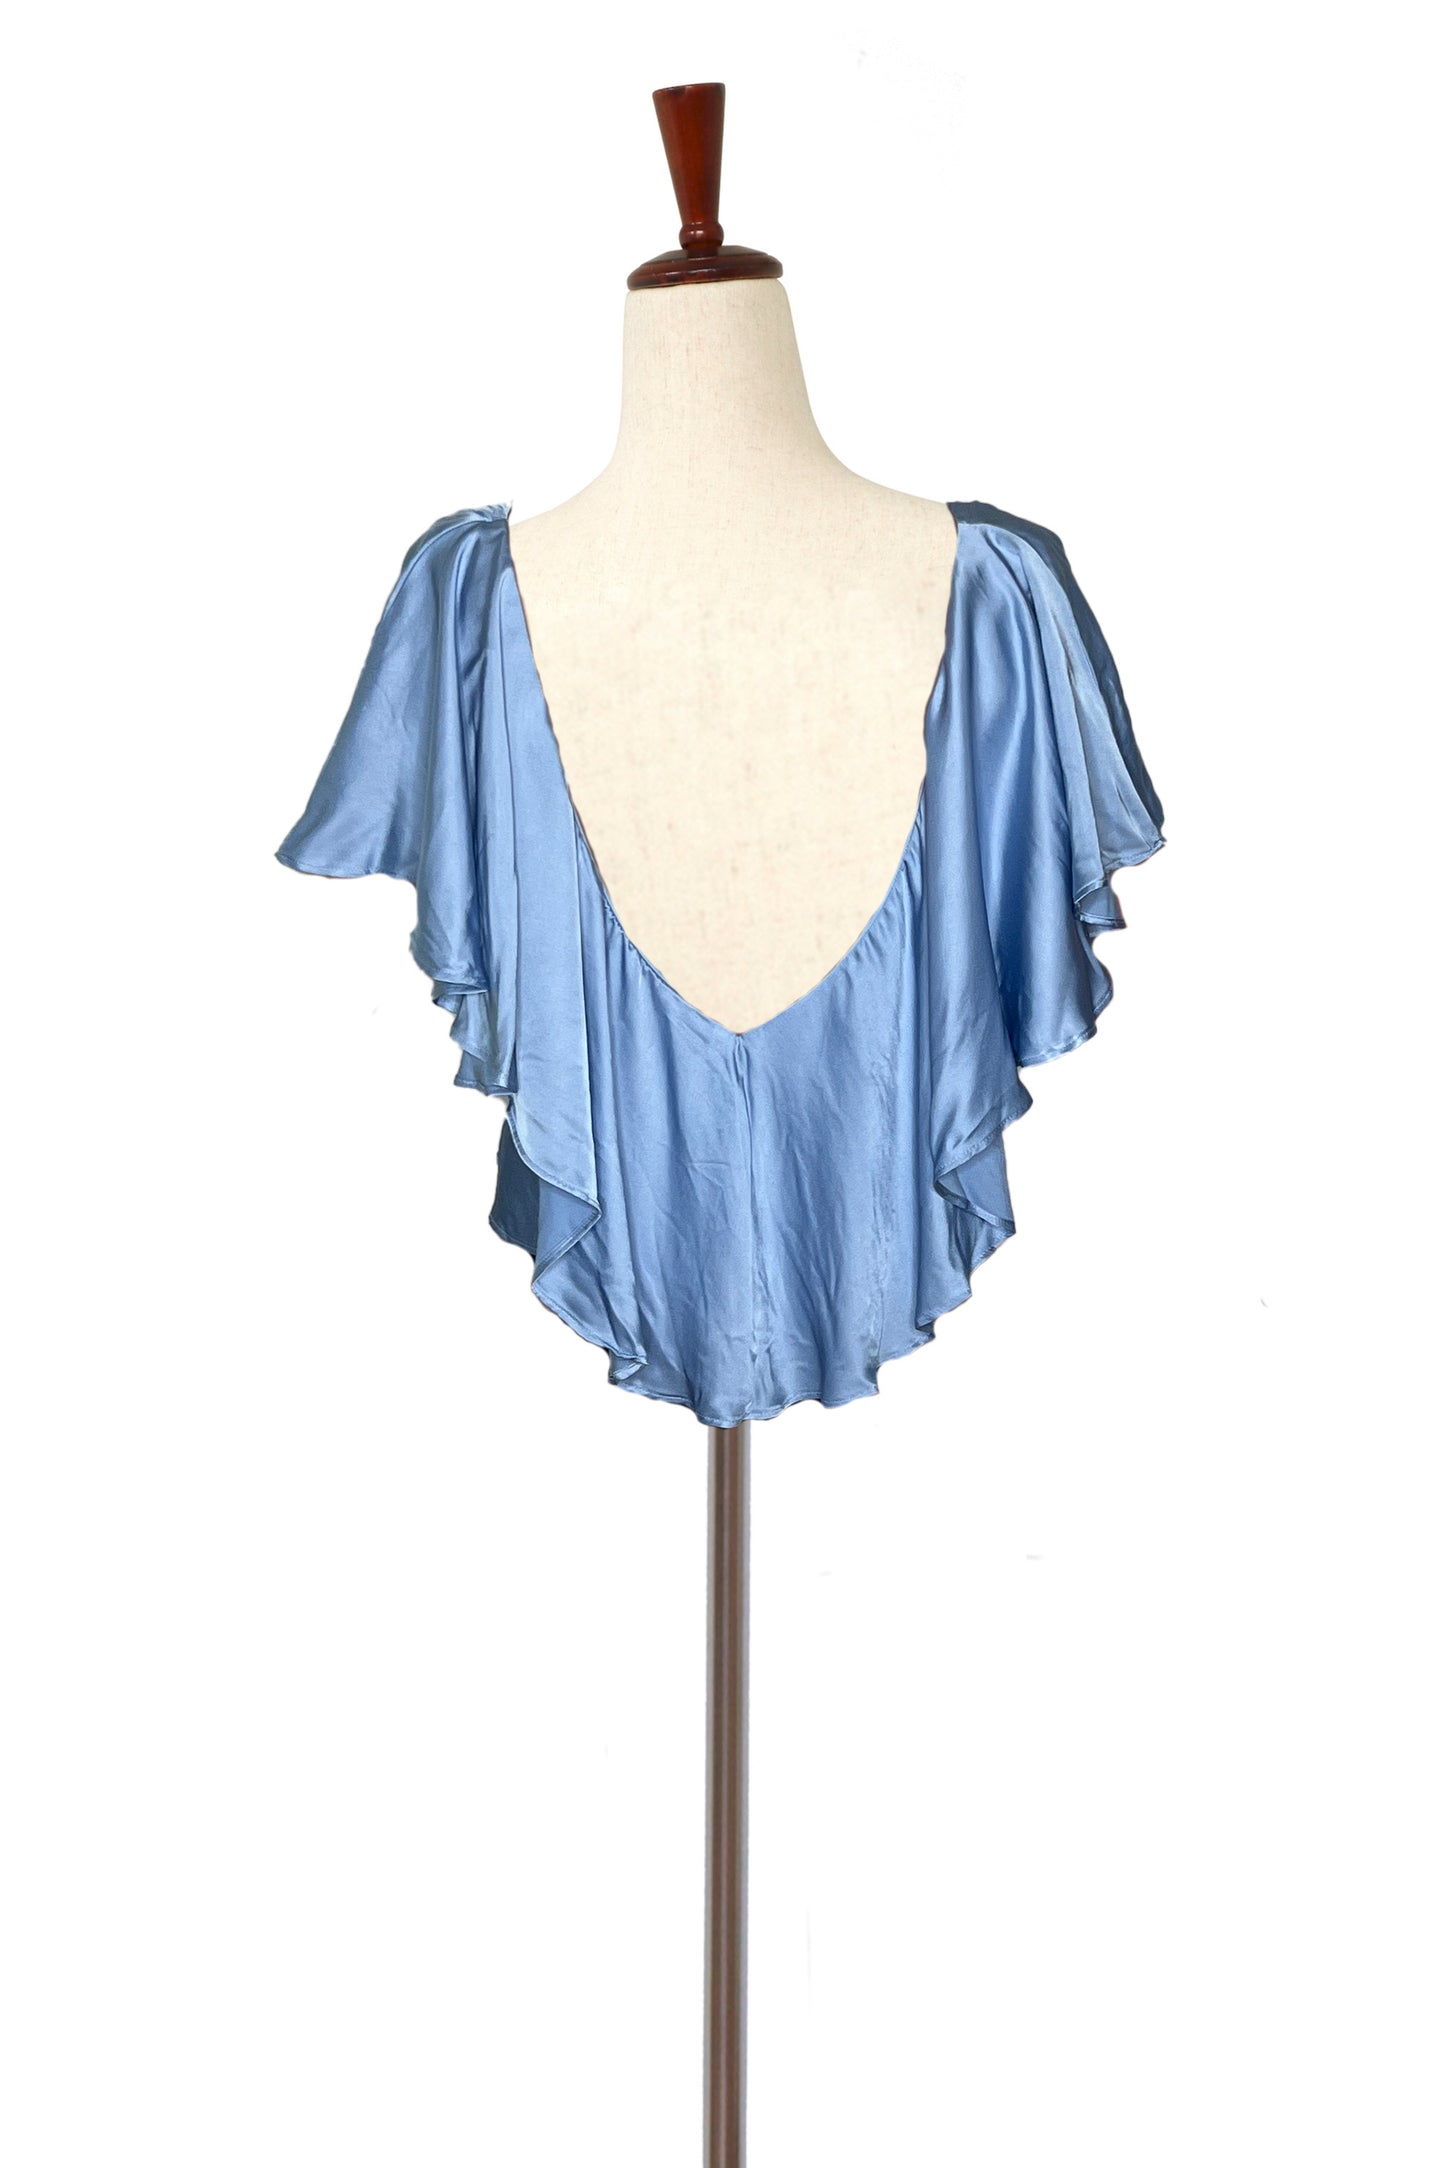 BACKSTAGE - Baby Blue Silk Top - Size S